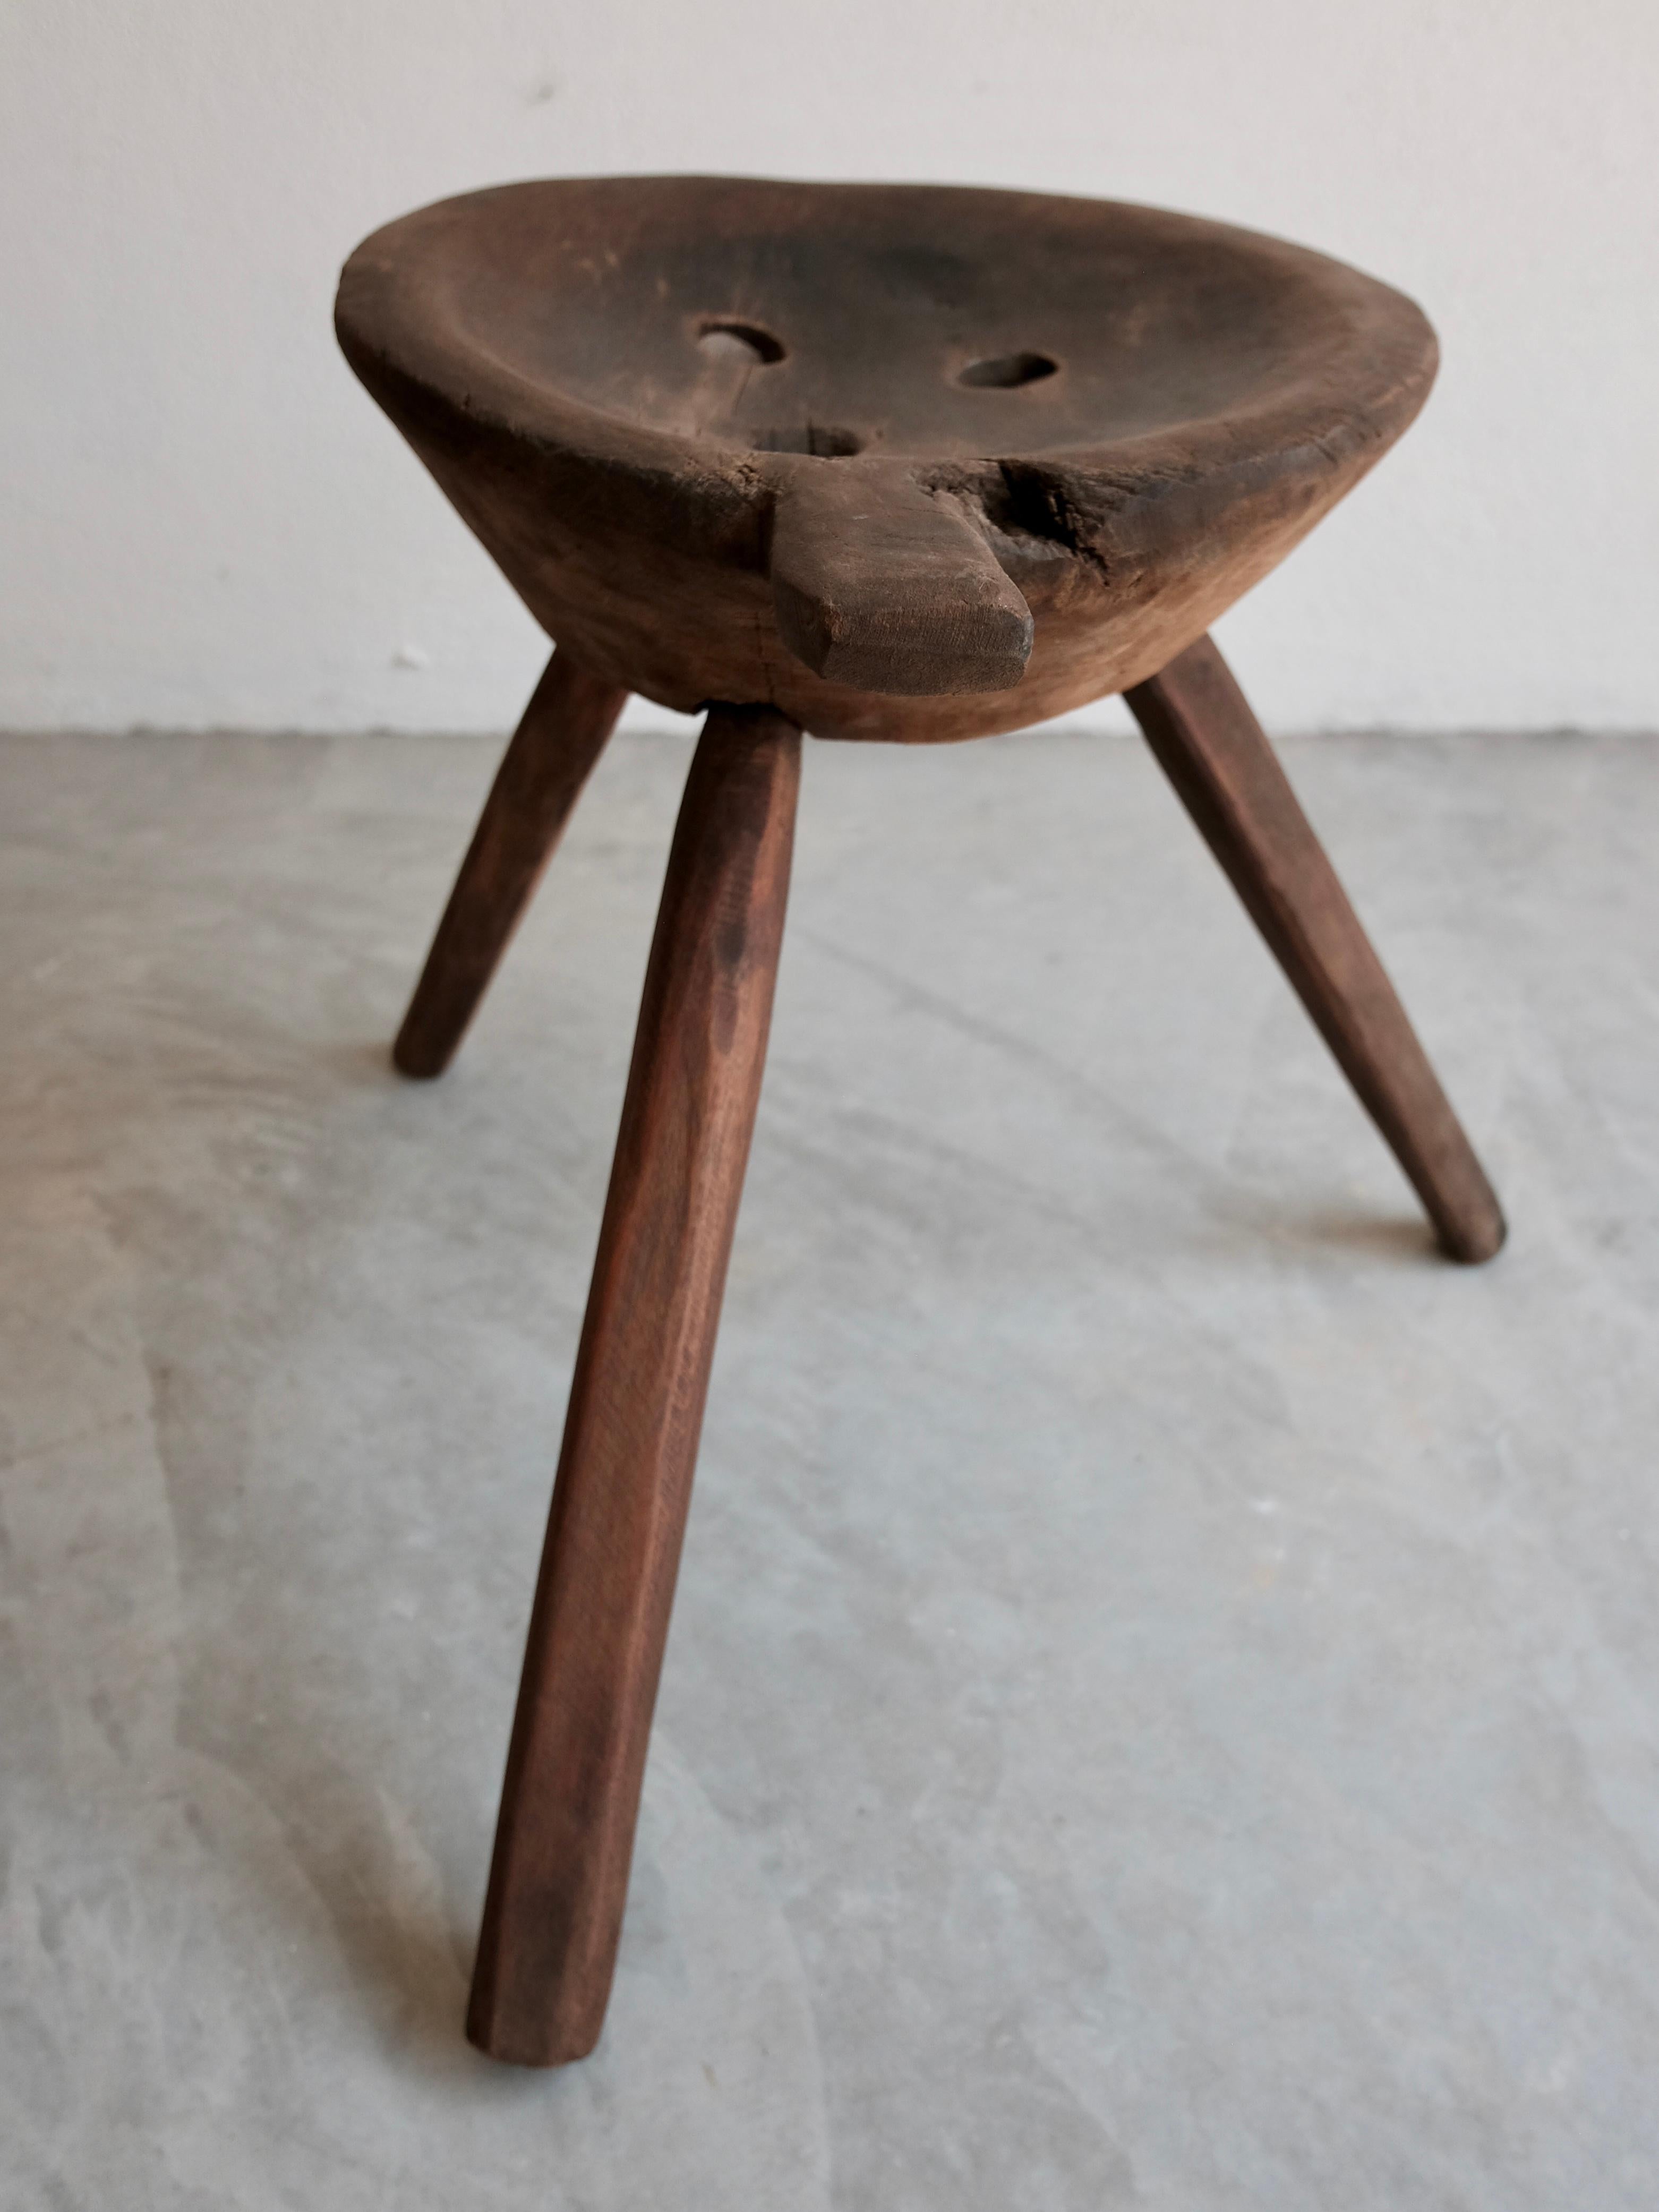 Hand-Carved Mesquite Work Stool from Mexico